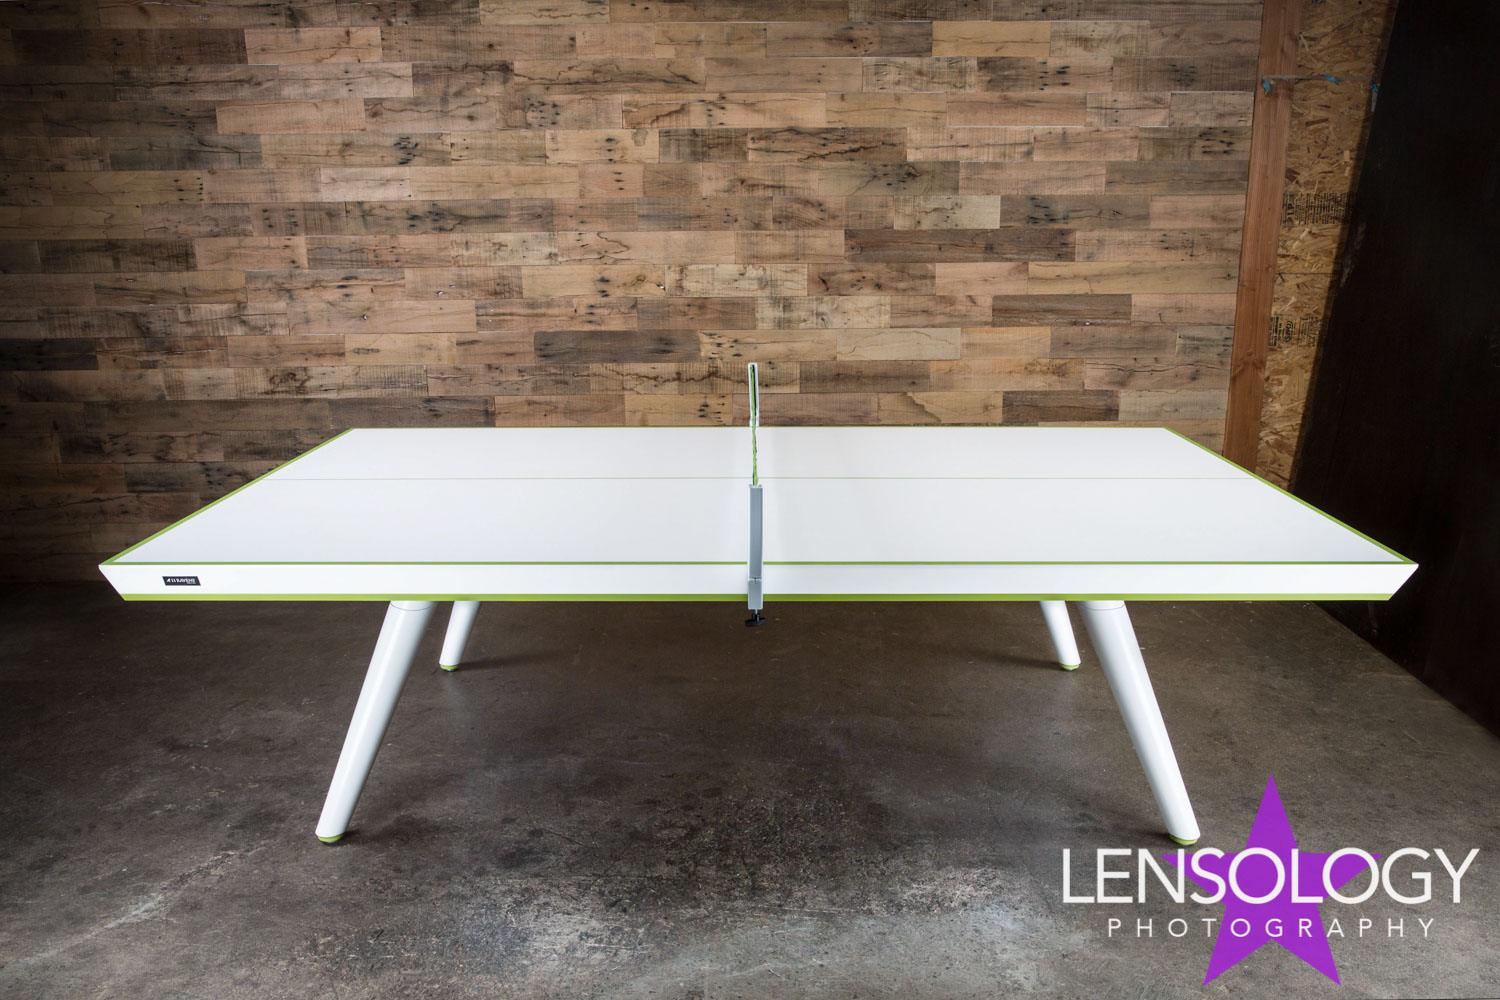 LENSOLOGY.NET - Product photography for 11 Ravens custom table tennis tables, LA, CA.
All images are copyright of Lensology.net
Email: info@lensology.net
www.lensology.net